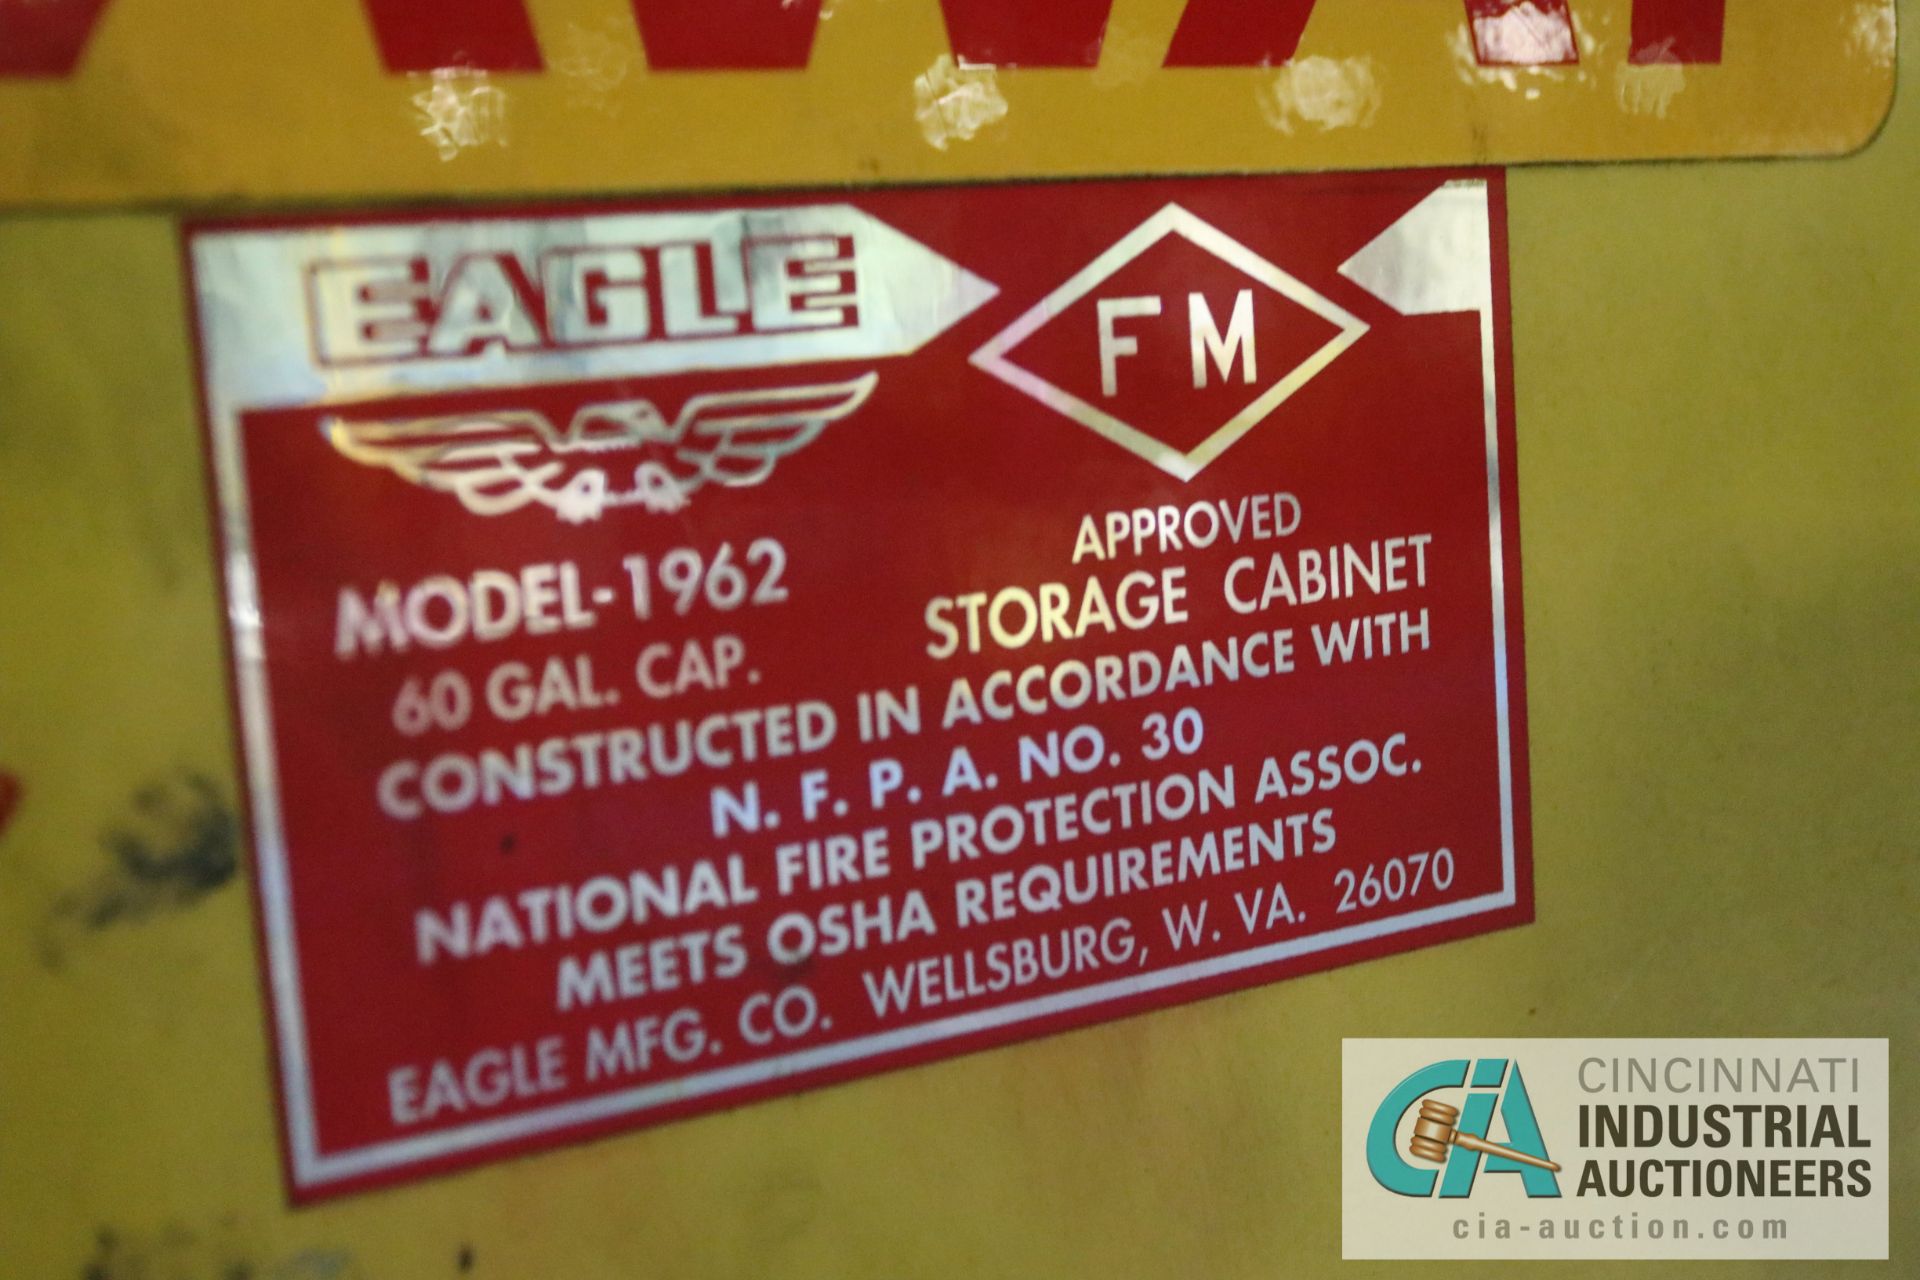 31.5" X 31.5" X 65" X 60 GALLON EAGLE FLAMMABLE CABINT - $10.00 Rigging Fee Due to Onsite Rigger - - Image 2 of 2